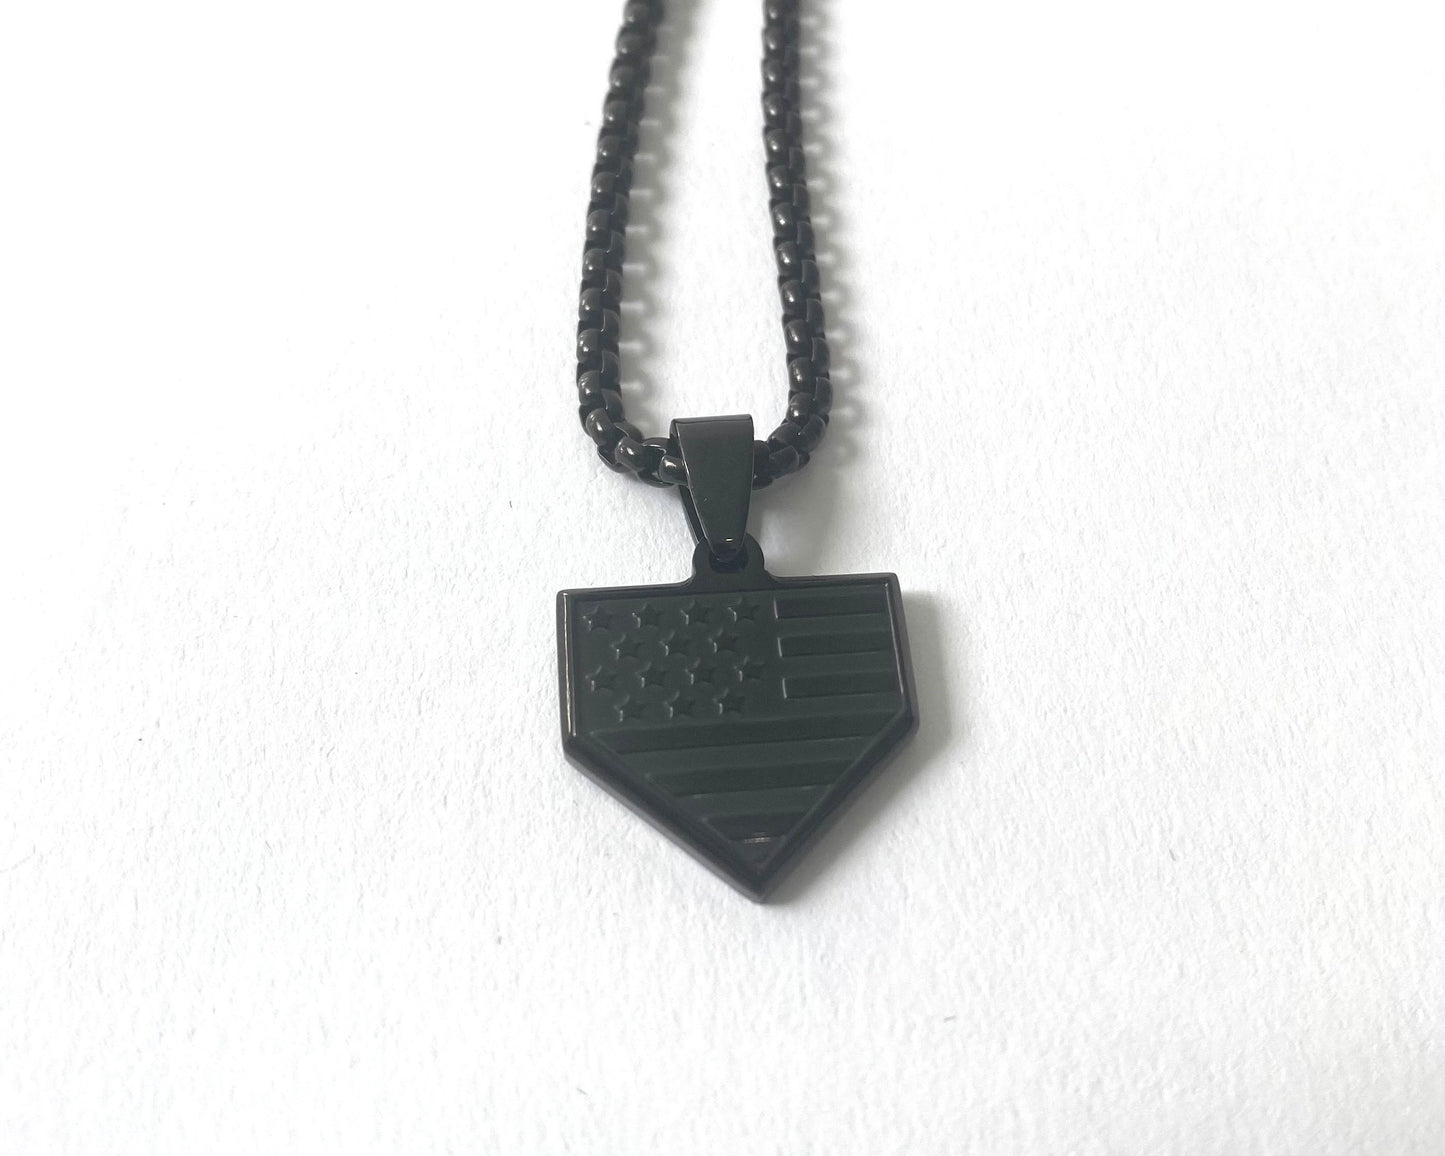 USA Home Plate Necklace